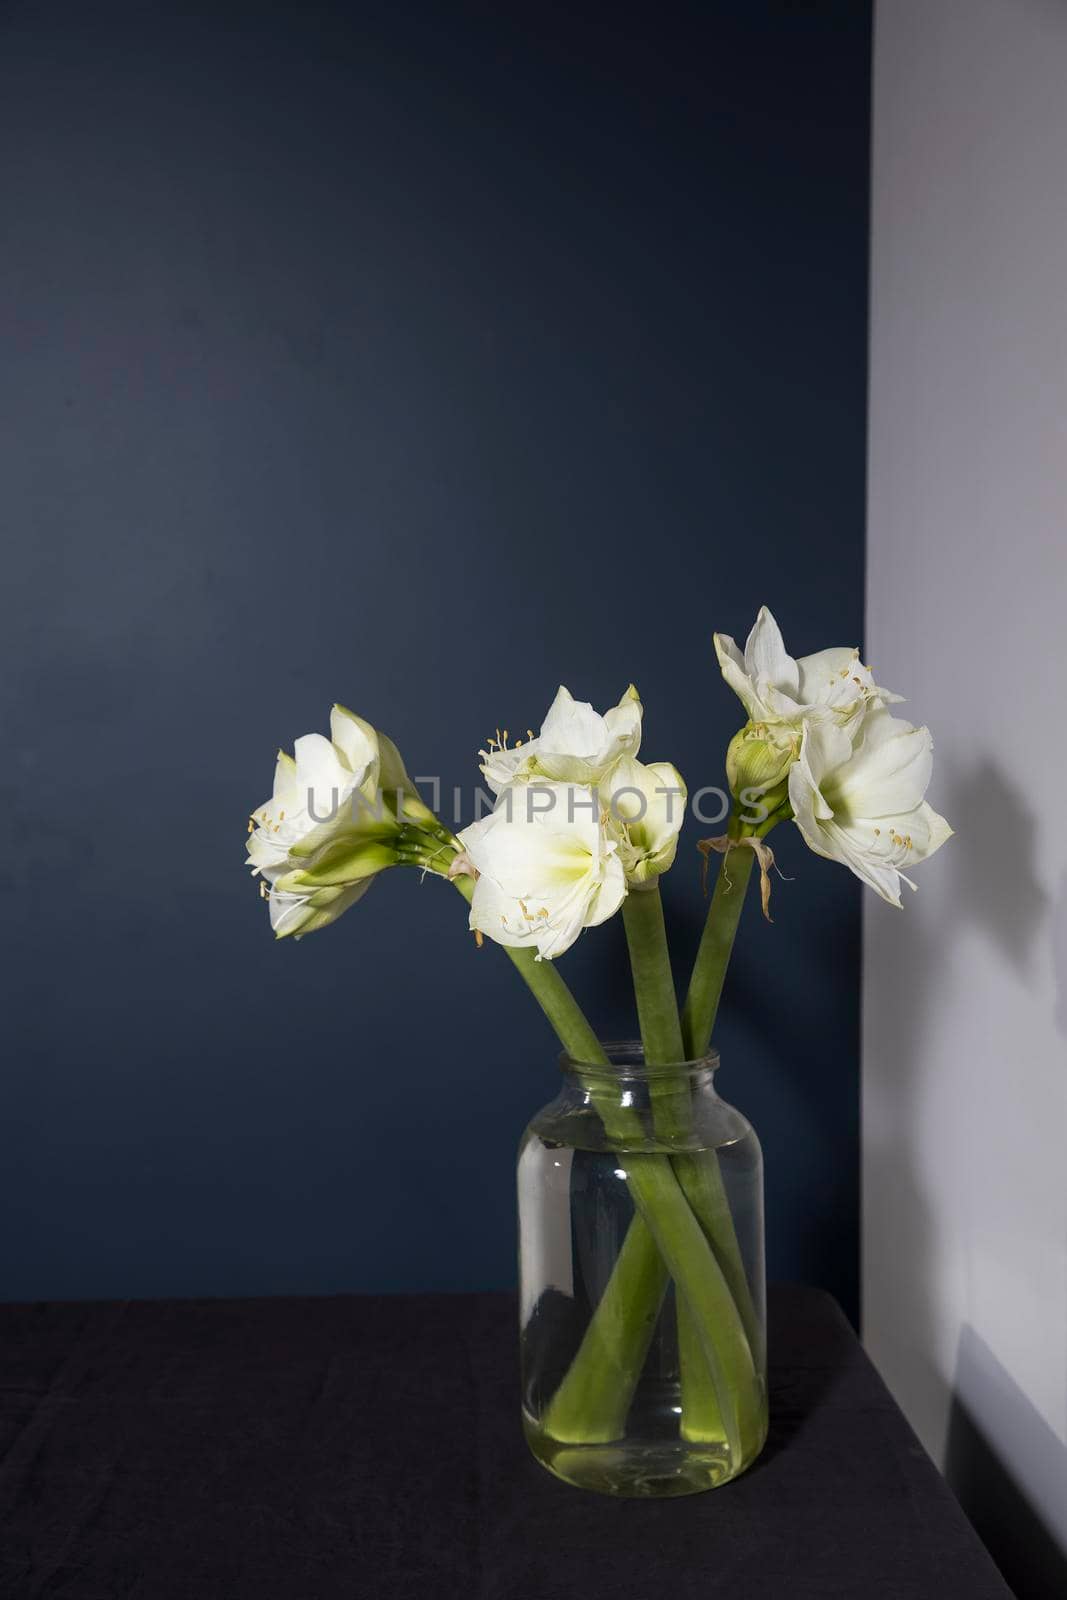 Bouquet of white lilies in a tall glass vase on a wooden table against a dark blue wall. Copy space. by elenarostunova